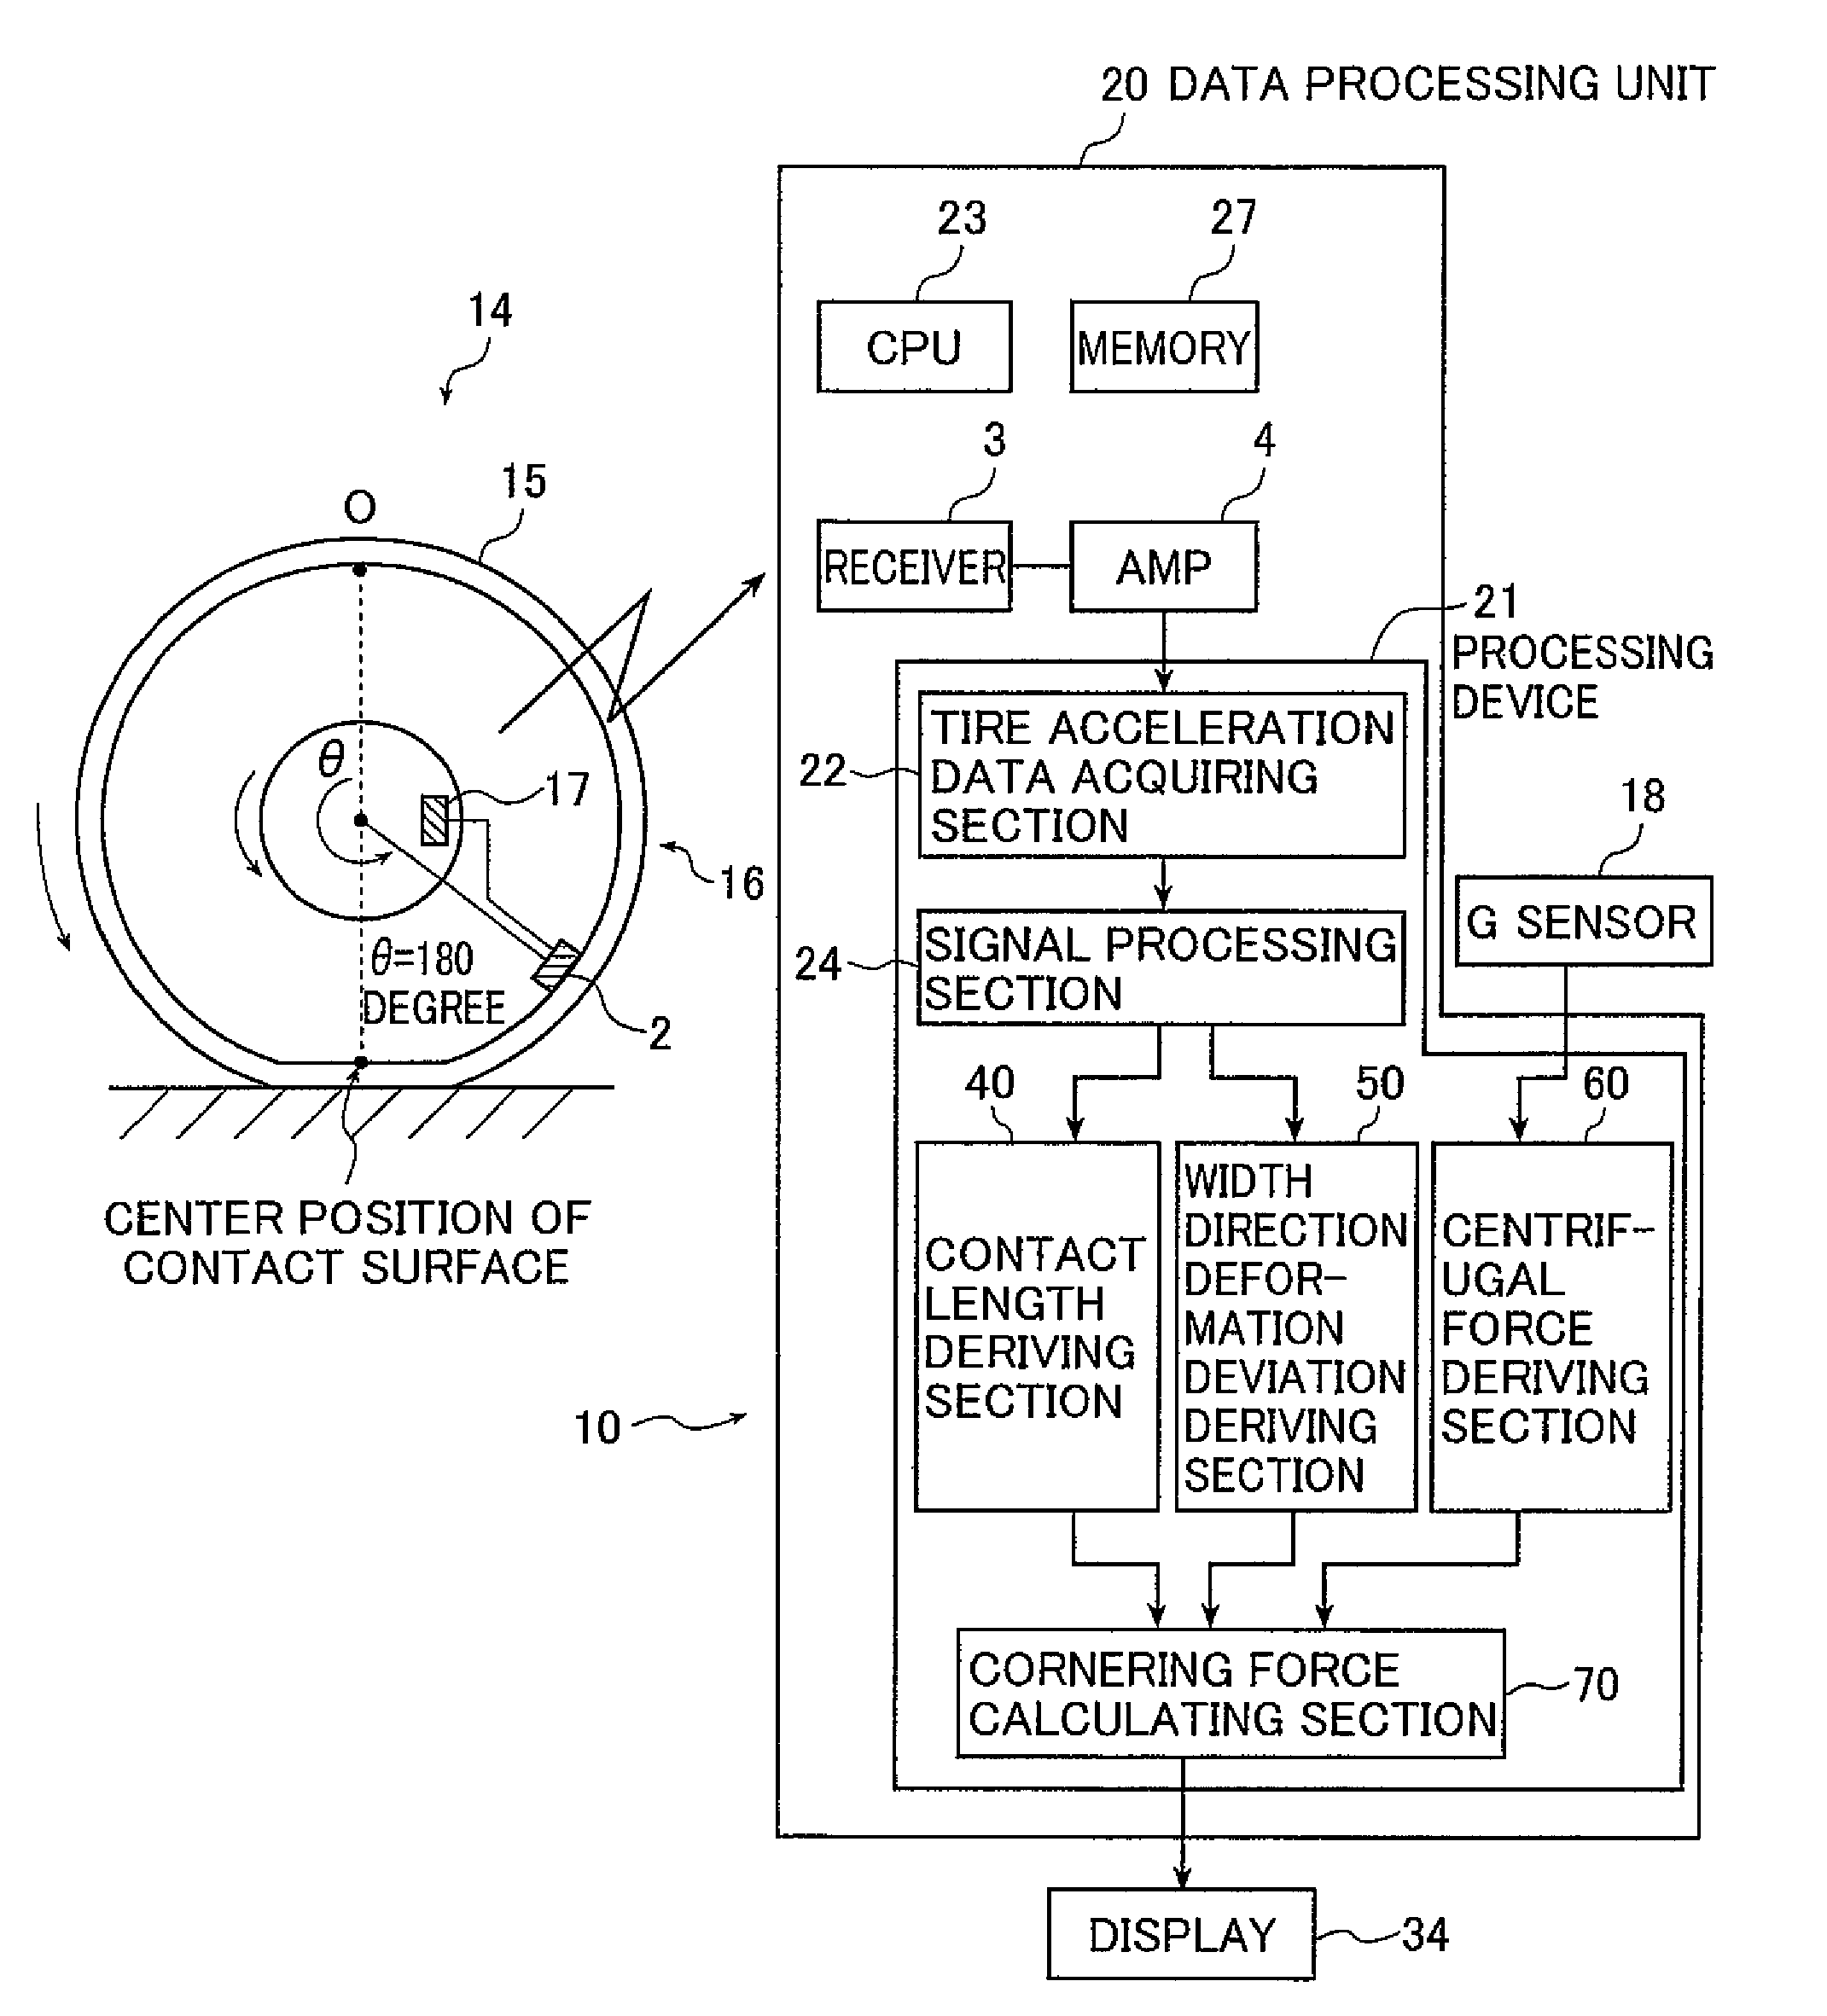 Method and device for calculating magnitude of wheel-generated cornering force